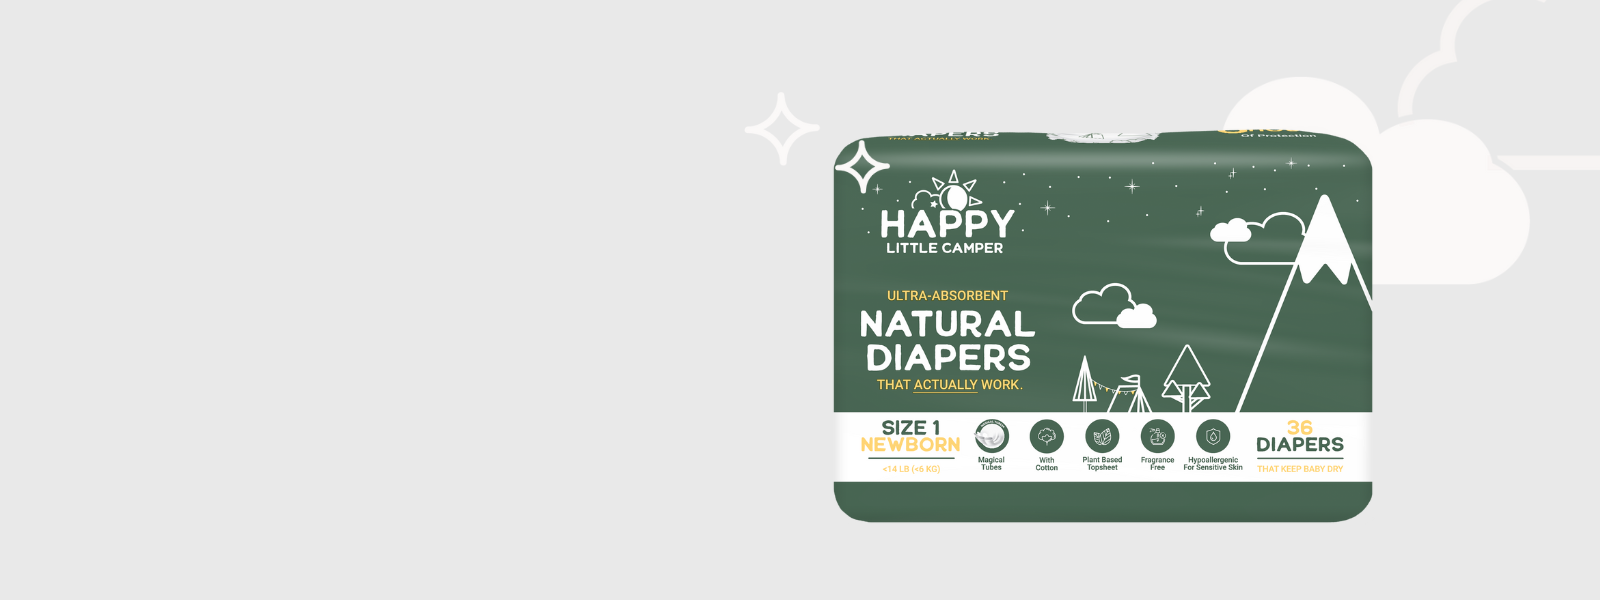 The plant-based eco nappy parents are loving! - Page 2 of 2 - The